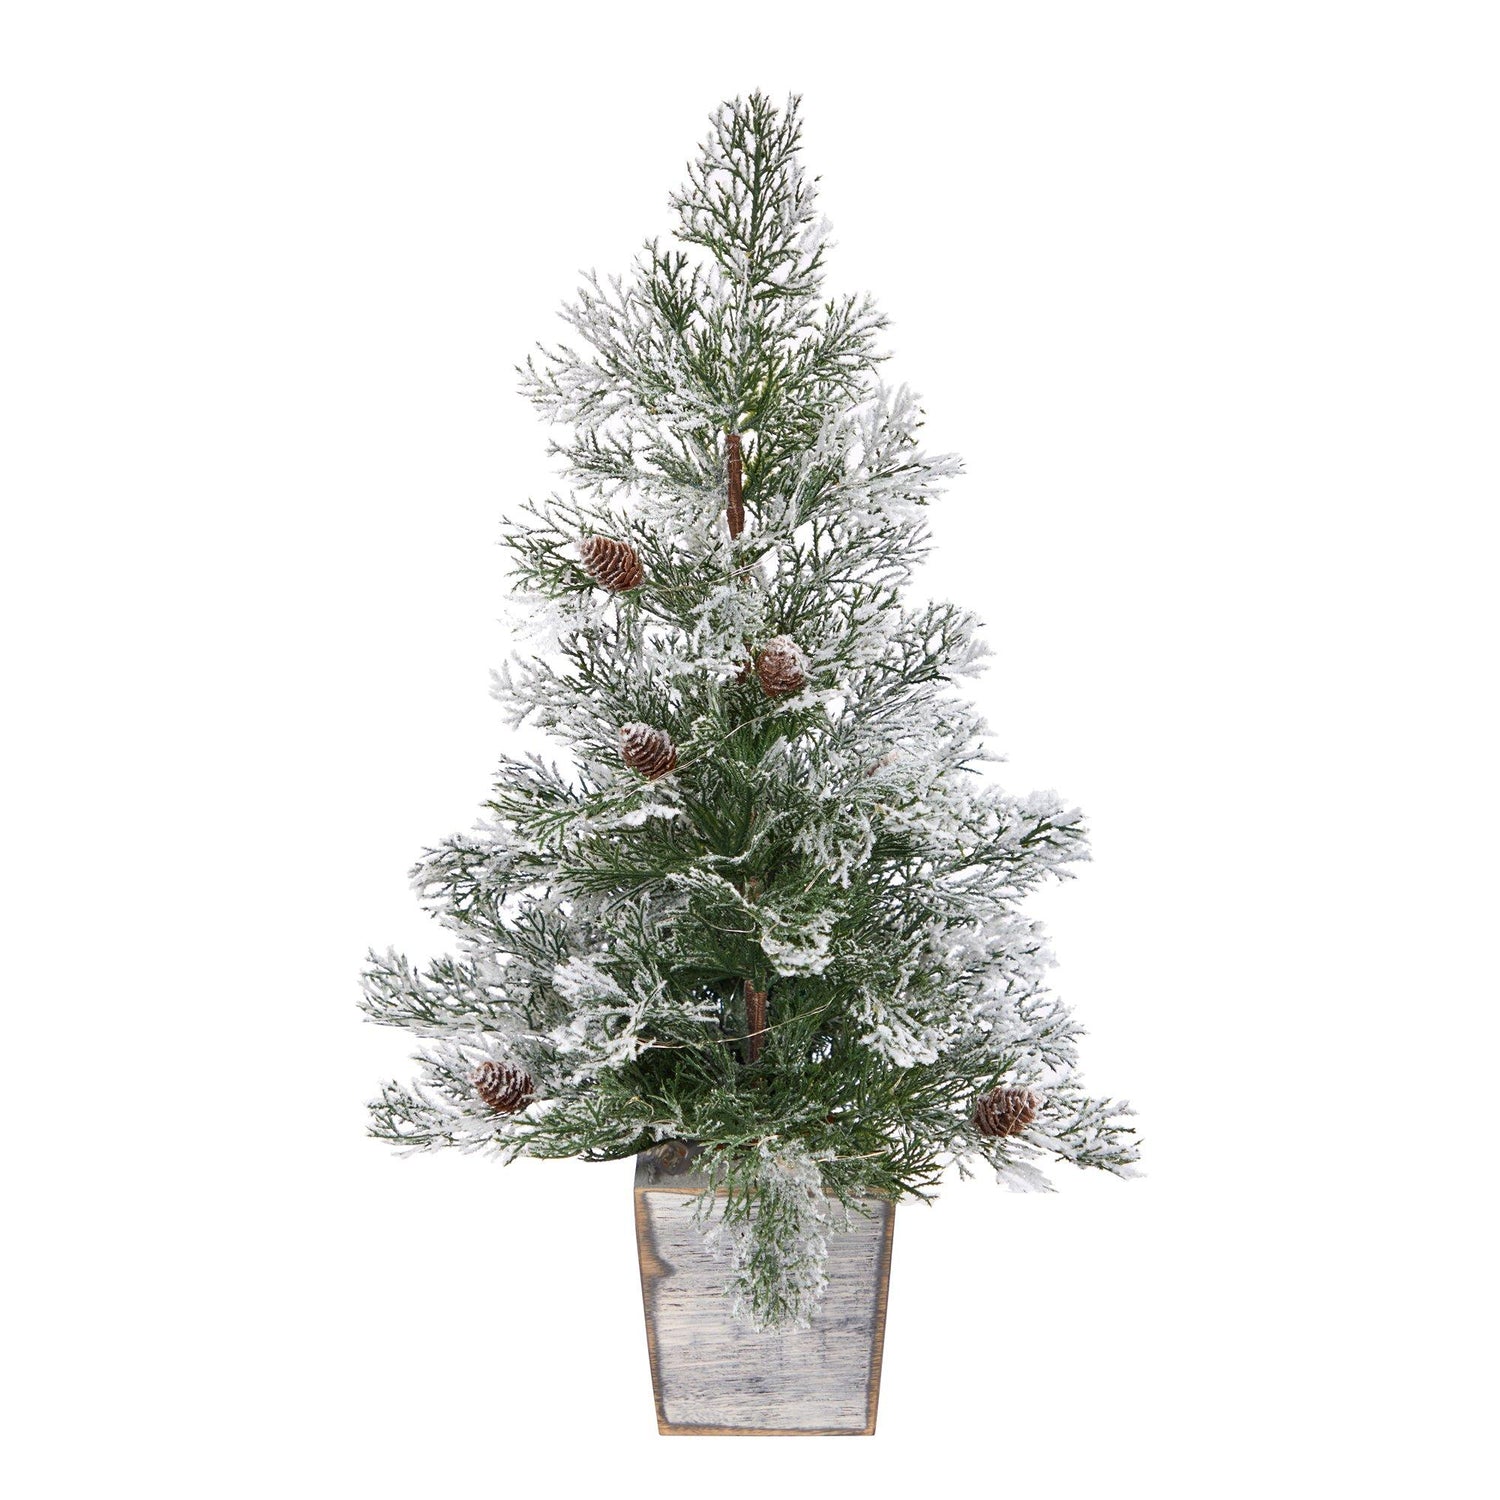 2’ Frosted Pre-Lit Artificial Christmas Tree with Pinecones in Decorative Planter